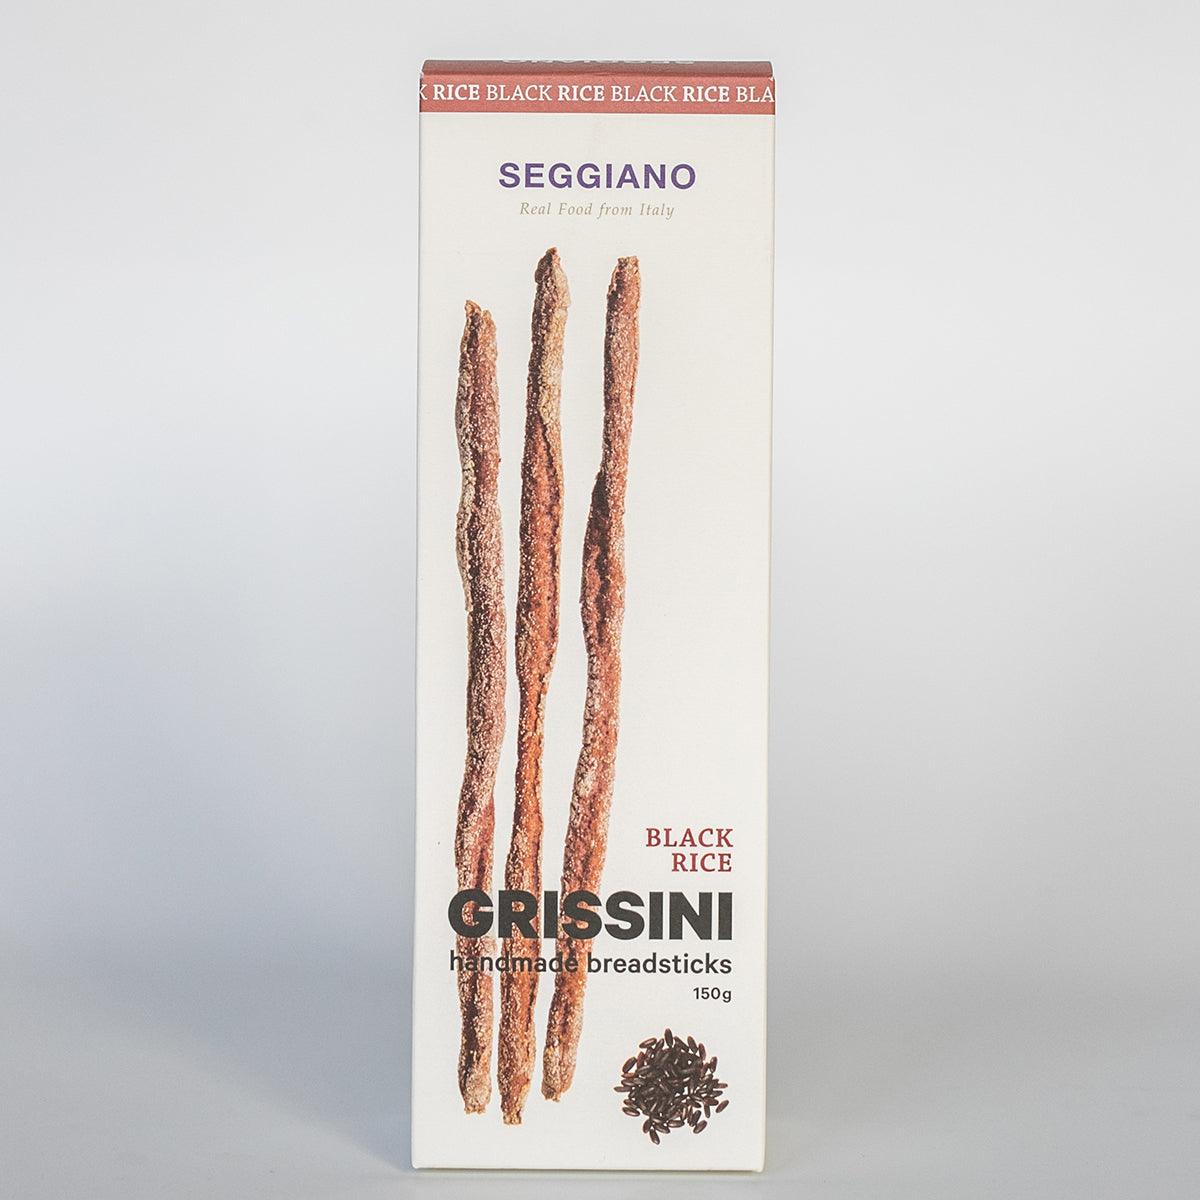 Black Rice Grissini by Seggiano 150g - The Dempsey Project